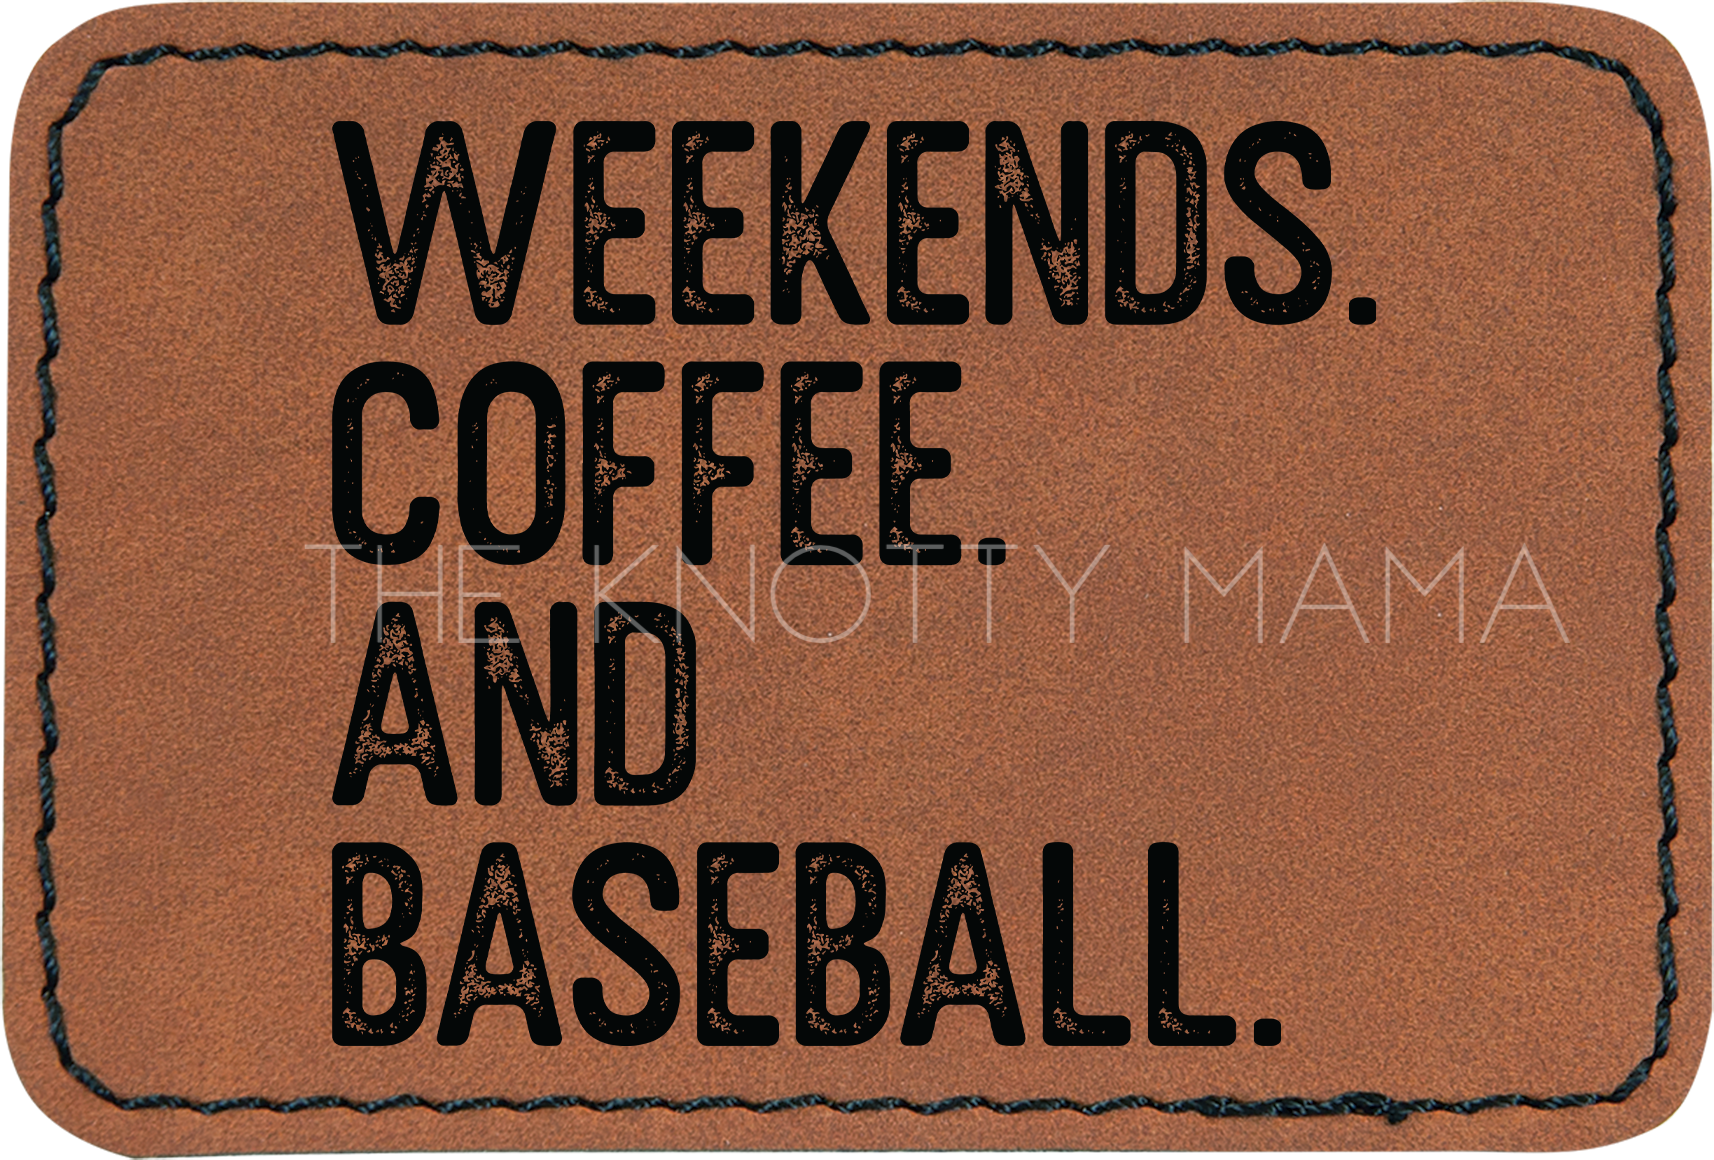 Weekends Coffee And Baseball Patch